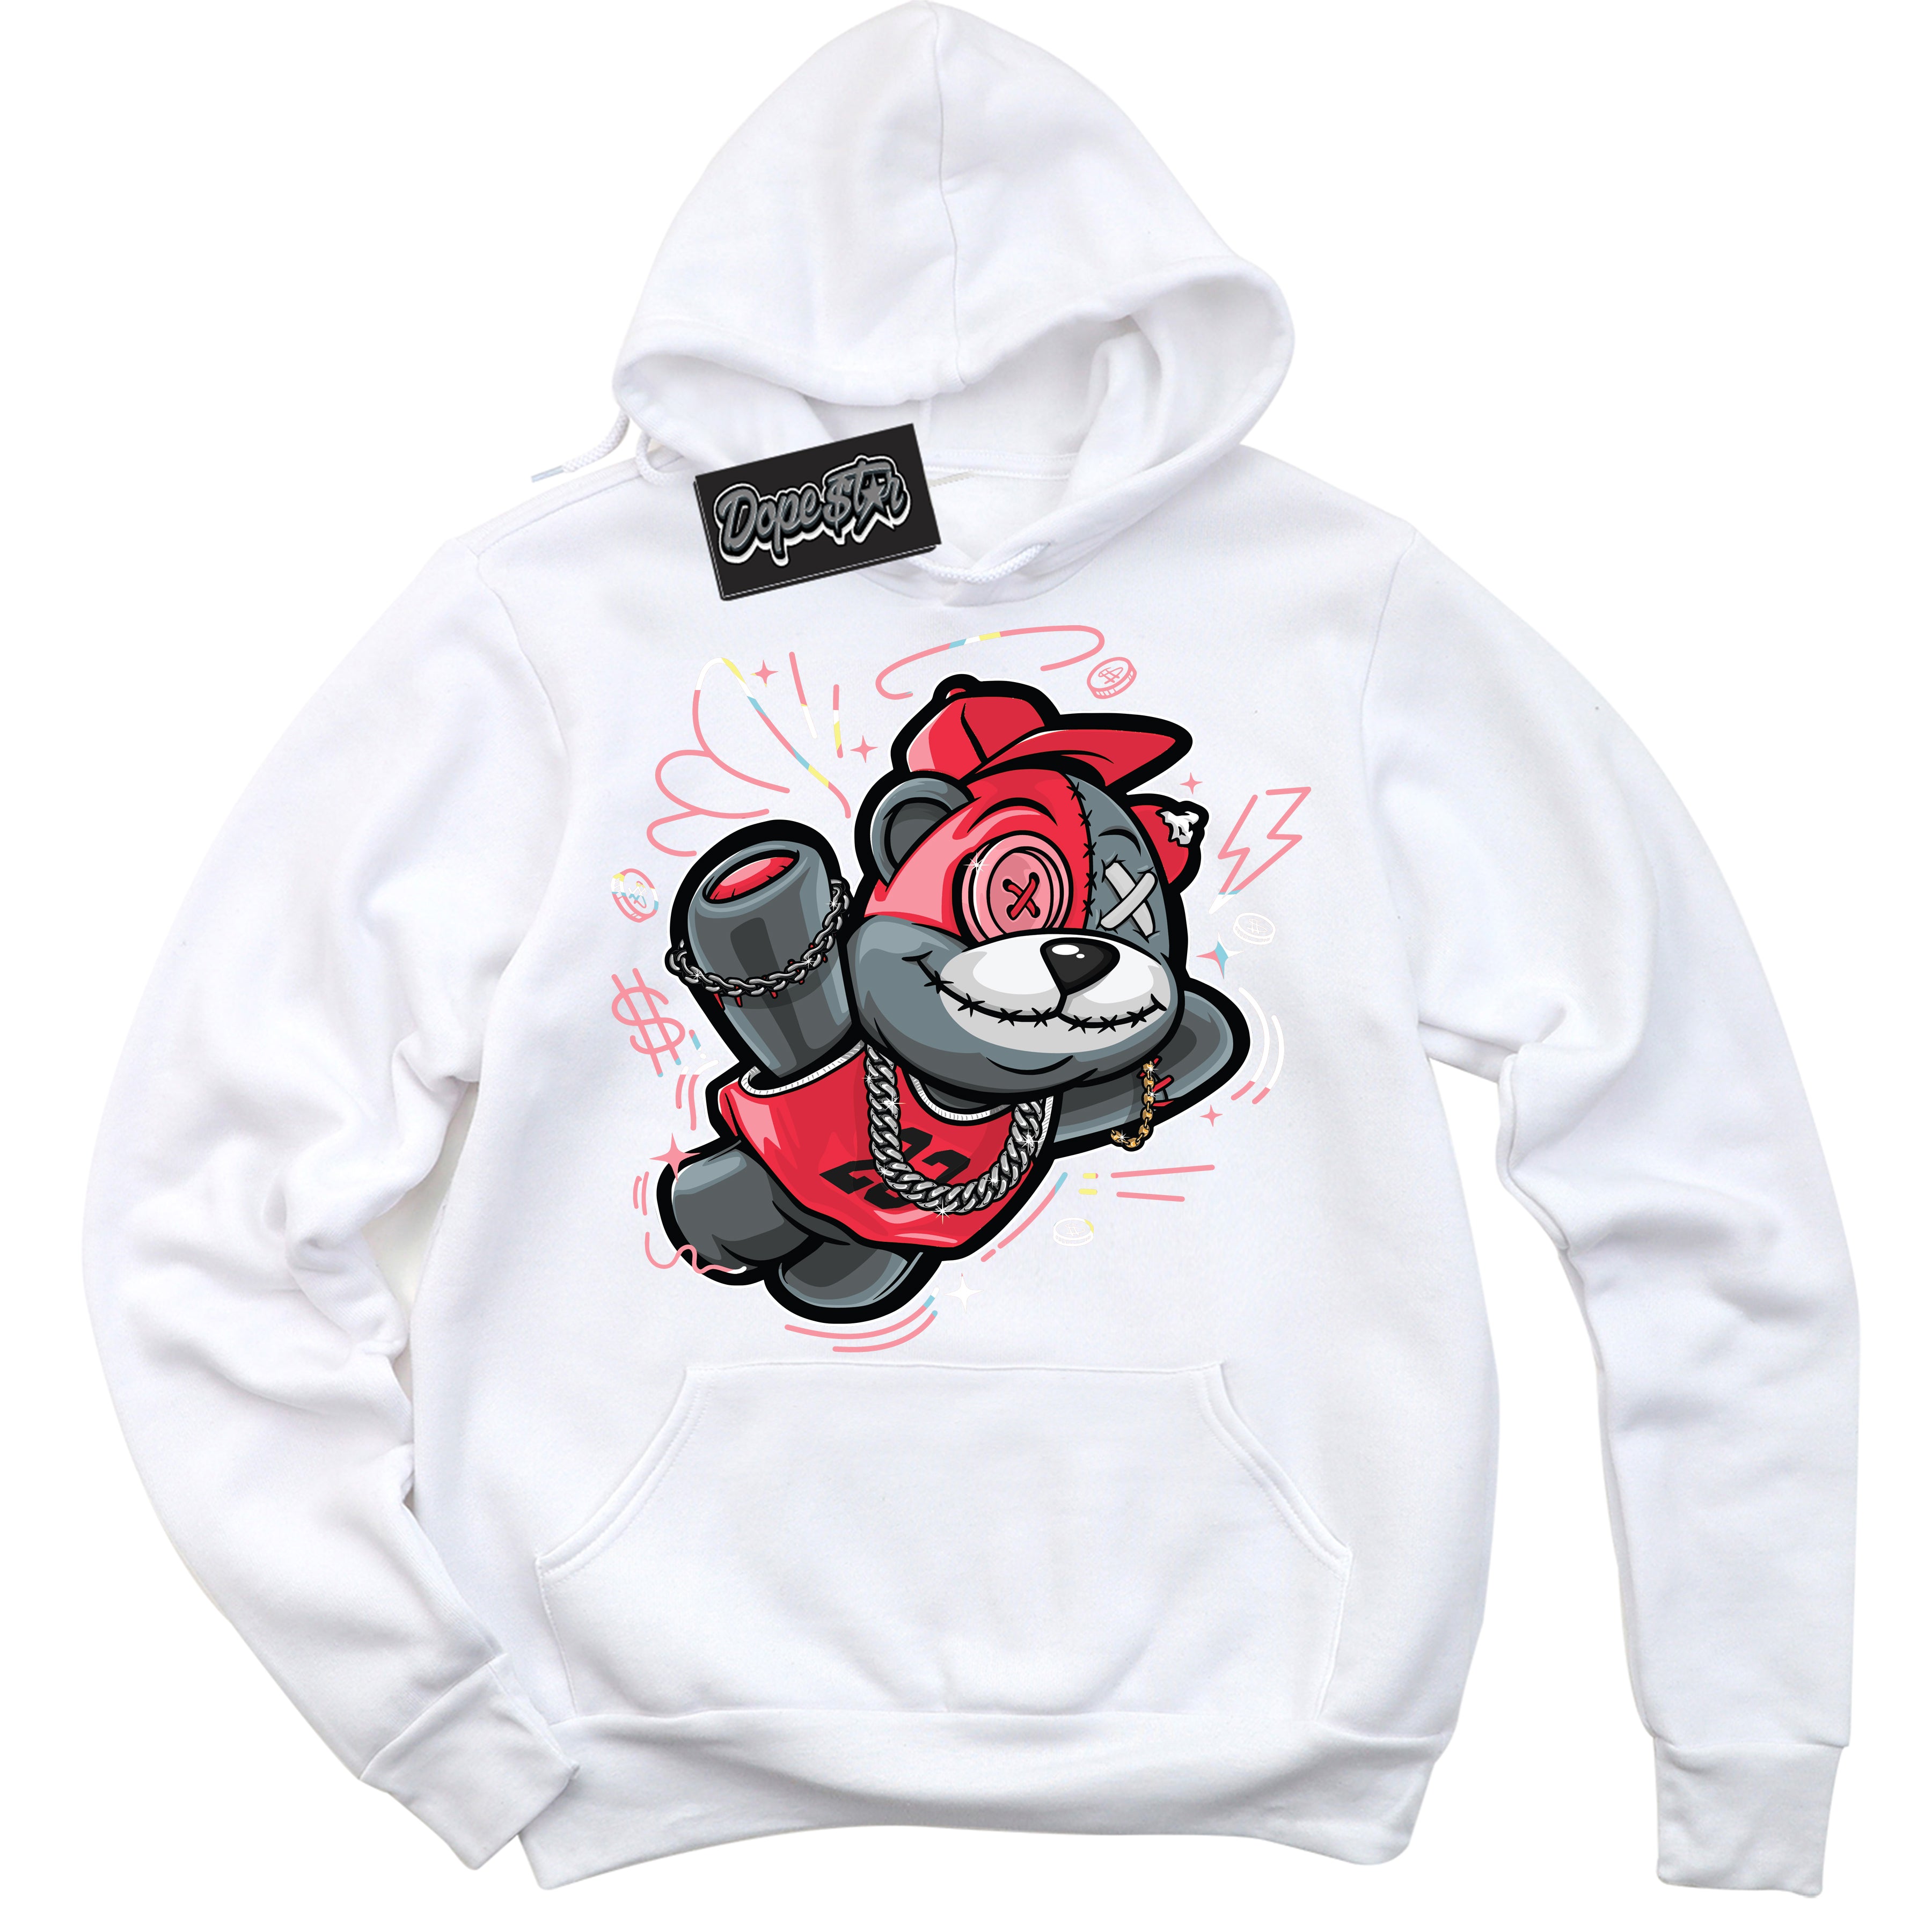 Cool White Graphic DopeStar Hoodie with “ Slam Dunk Bear “ print, that perfectly matches Spider-Verse 1s sneakers